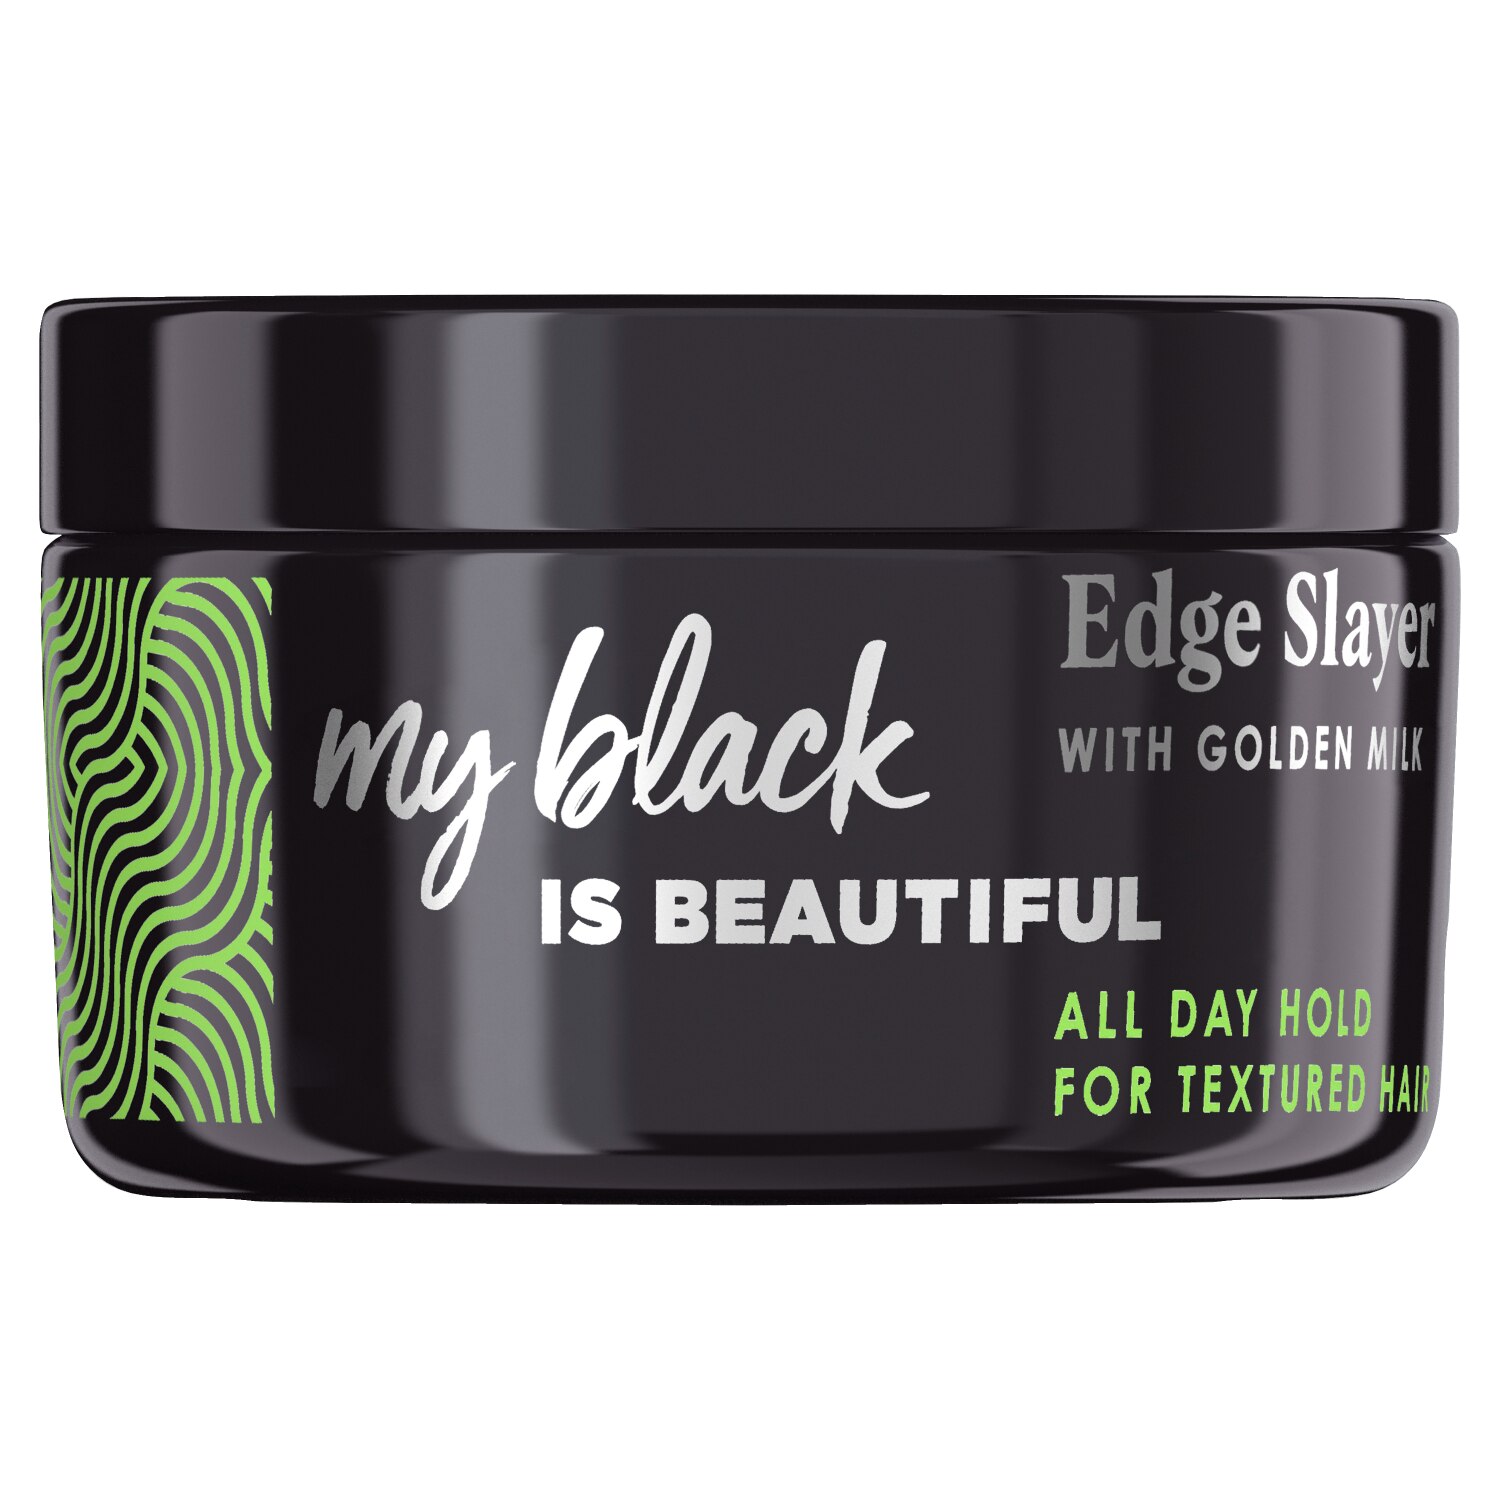 My Black is Beautiful Edge Slayer, Flake-Free Edge Control for Curly and Coily Hair, 2.6 OZ